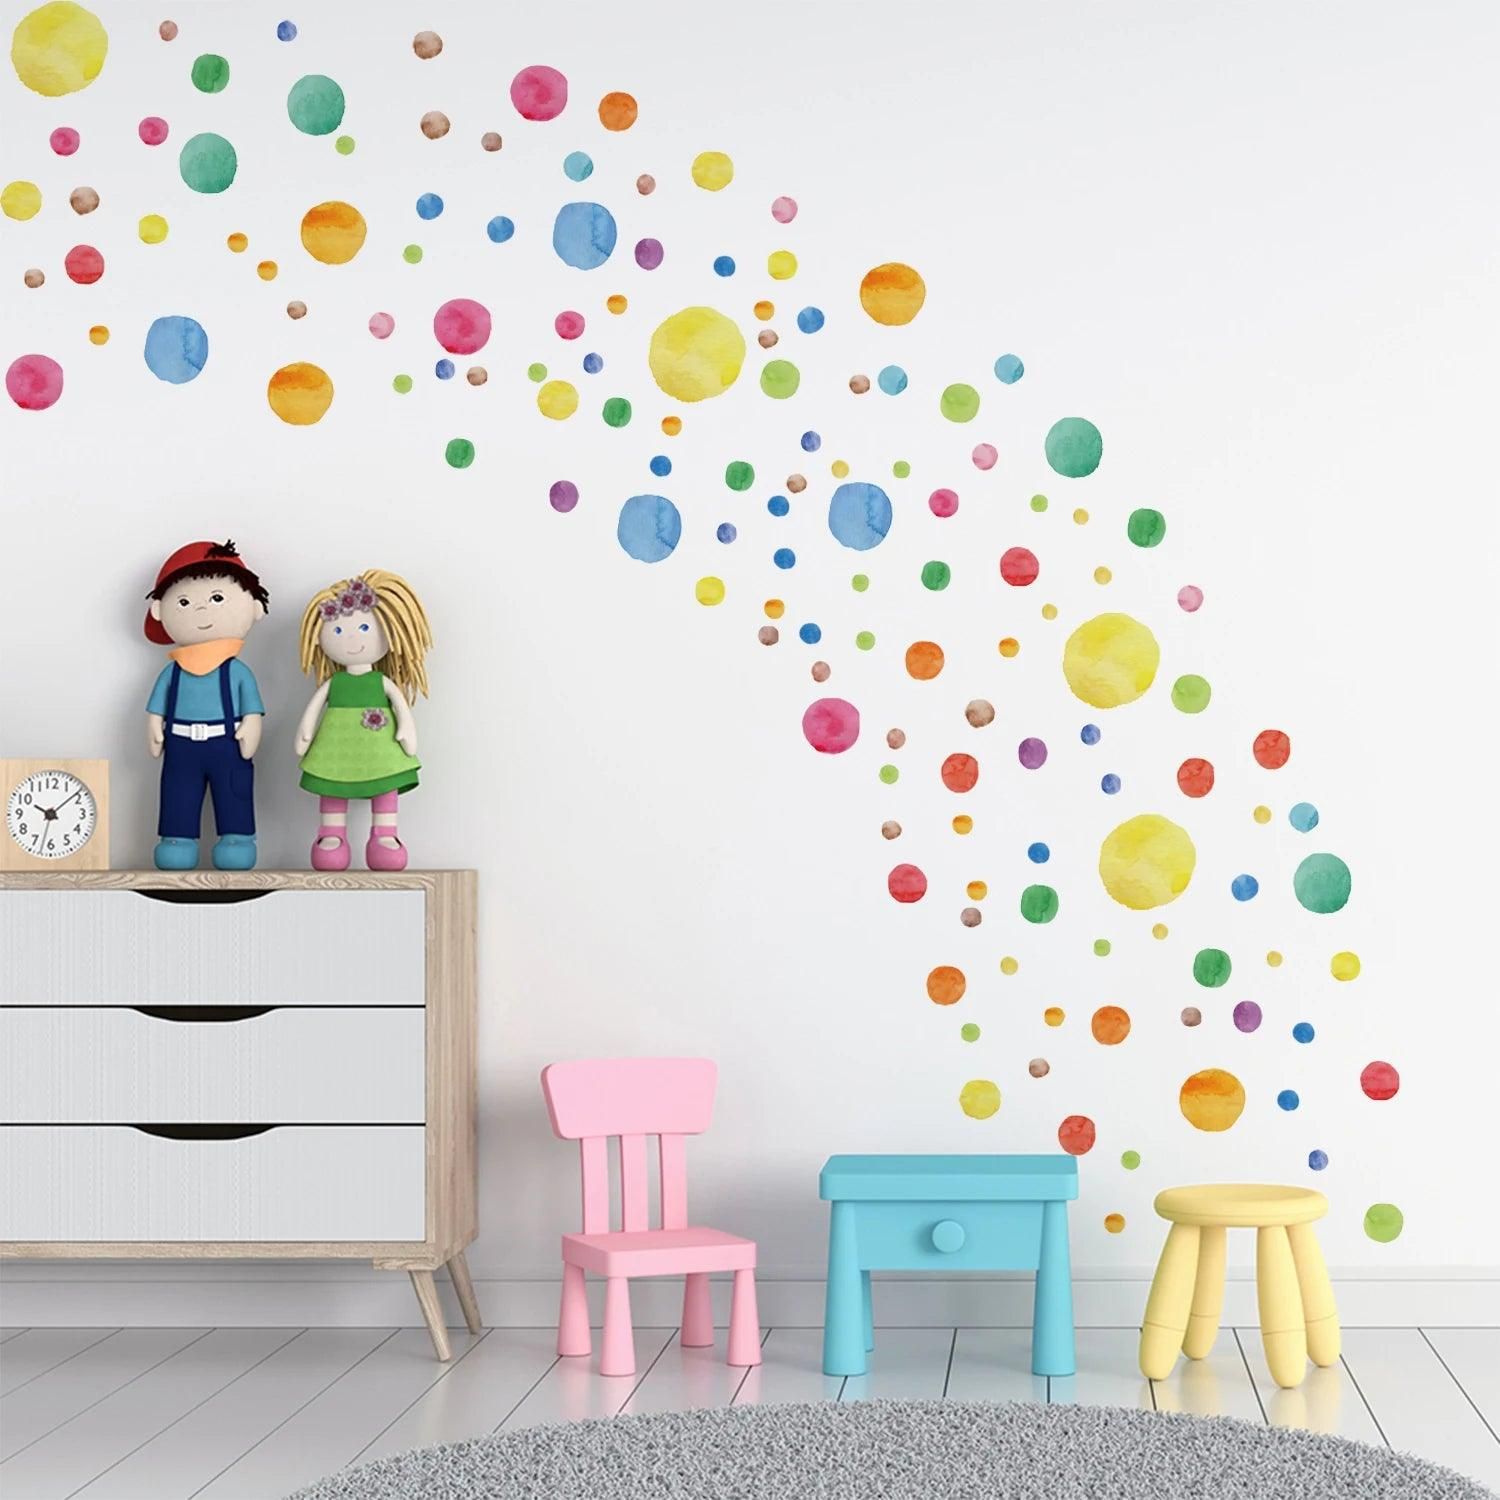 Bright Wall Stickers Transform Your Walls with Vibrant Decals That Will Make Your Space Pop